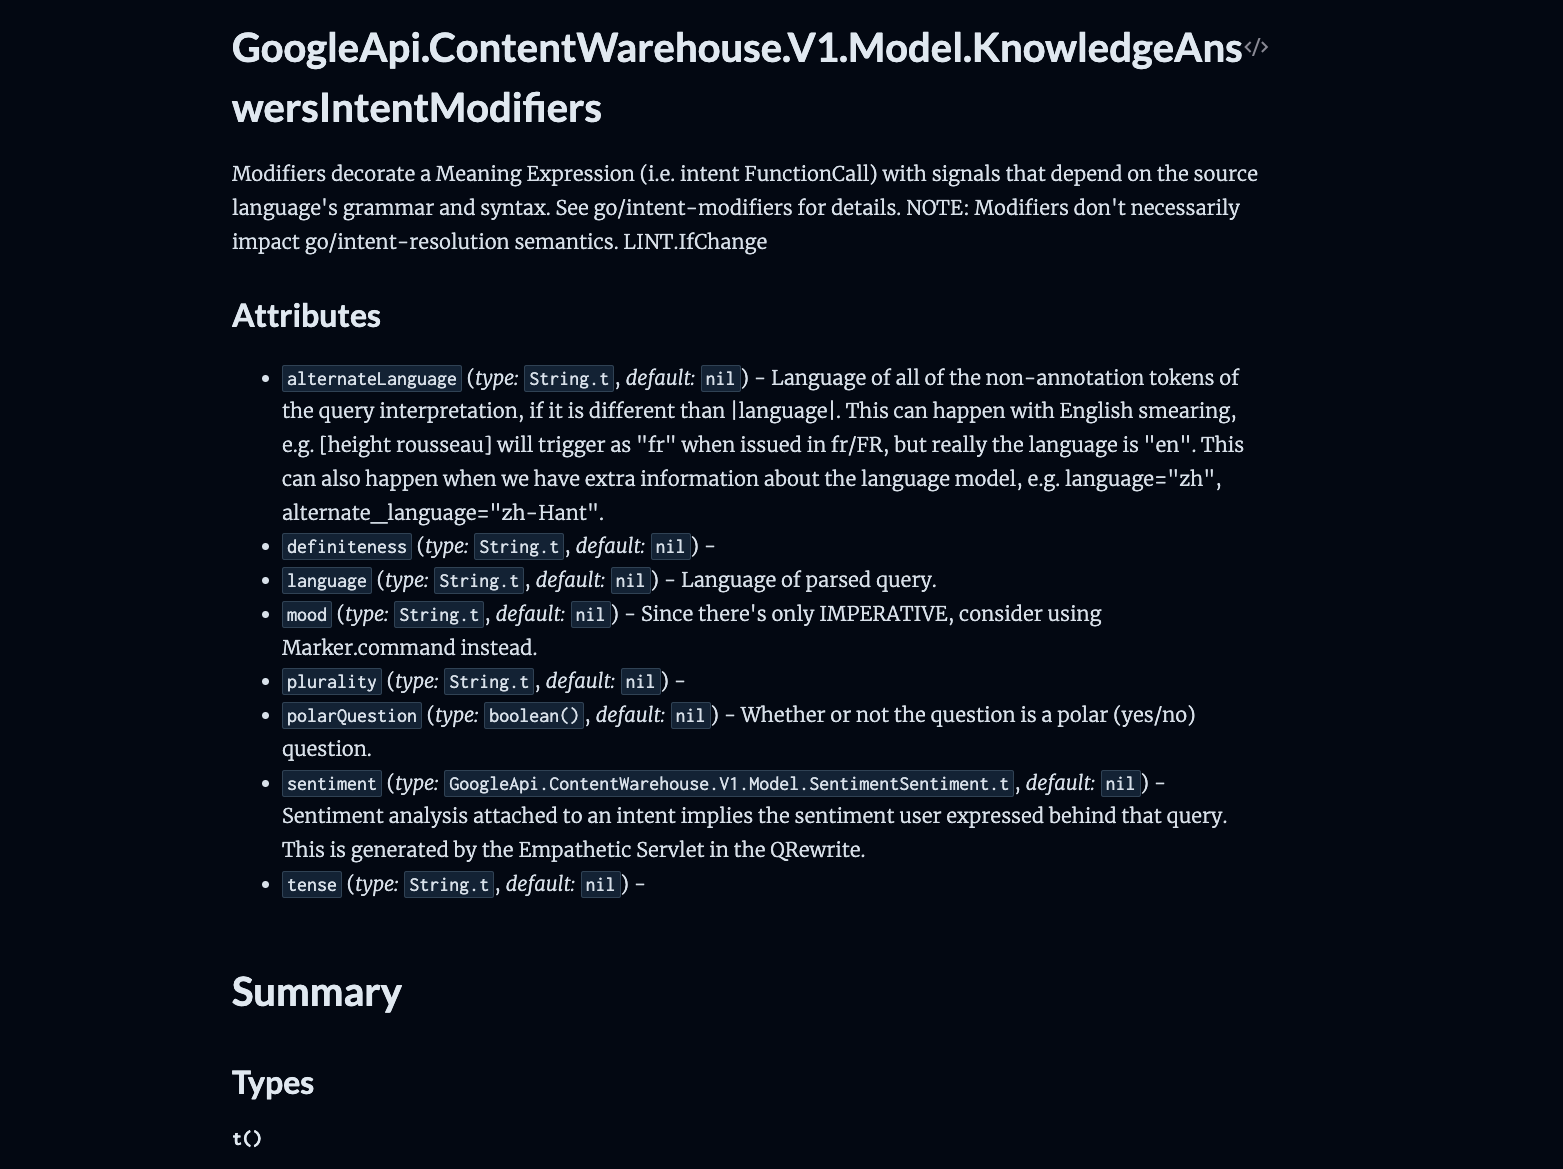 Google API docs for knowledge answer intent modifiers.